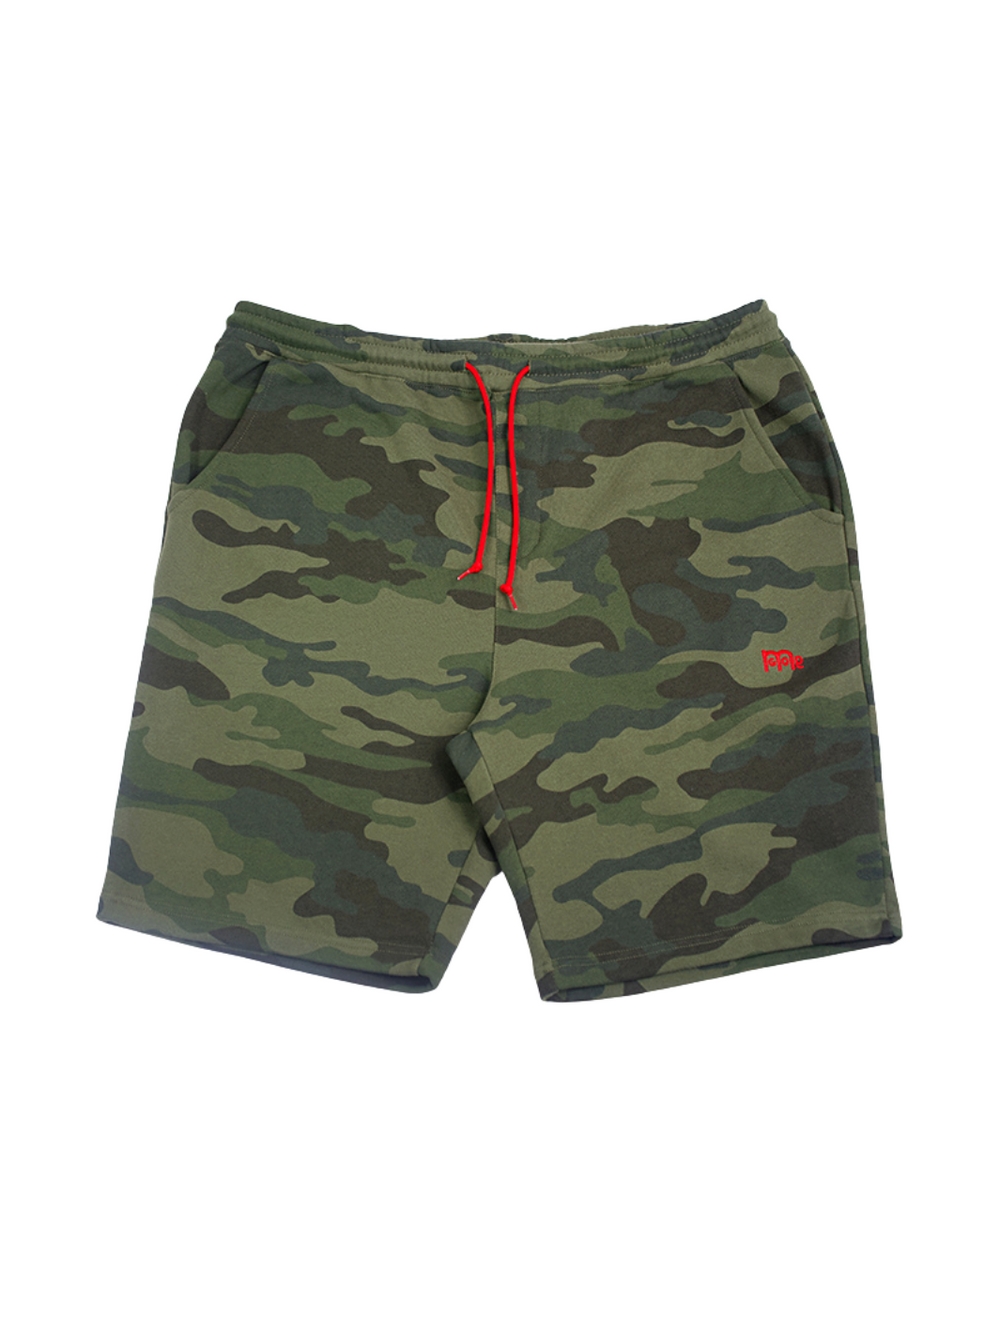 These actively casual GODinme shorts come in a Black or Green Camouflage design. Complete with a bold embroidered logo and a shoestring draw cord in Red to make a faithful statement wherever you go.